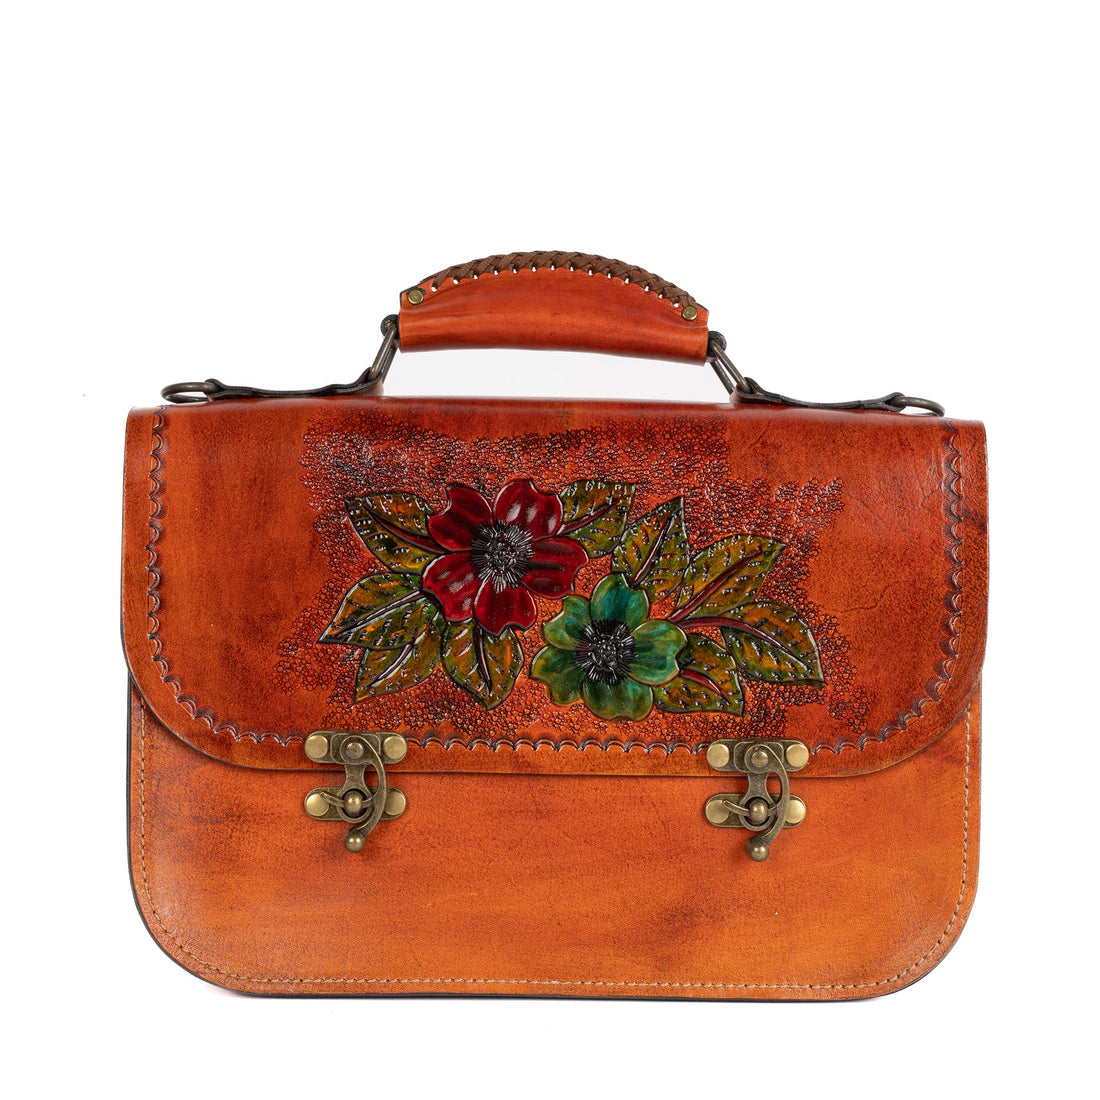 Two Flowers Chestnut Brown Leather Carved & Crafted Hand Bag - Handbags Zengoda Shop online from Artisan Brands